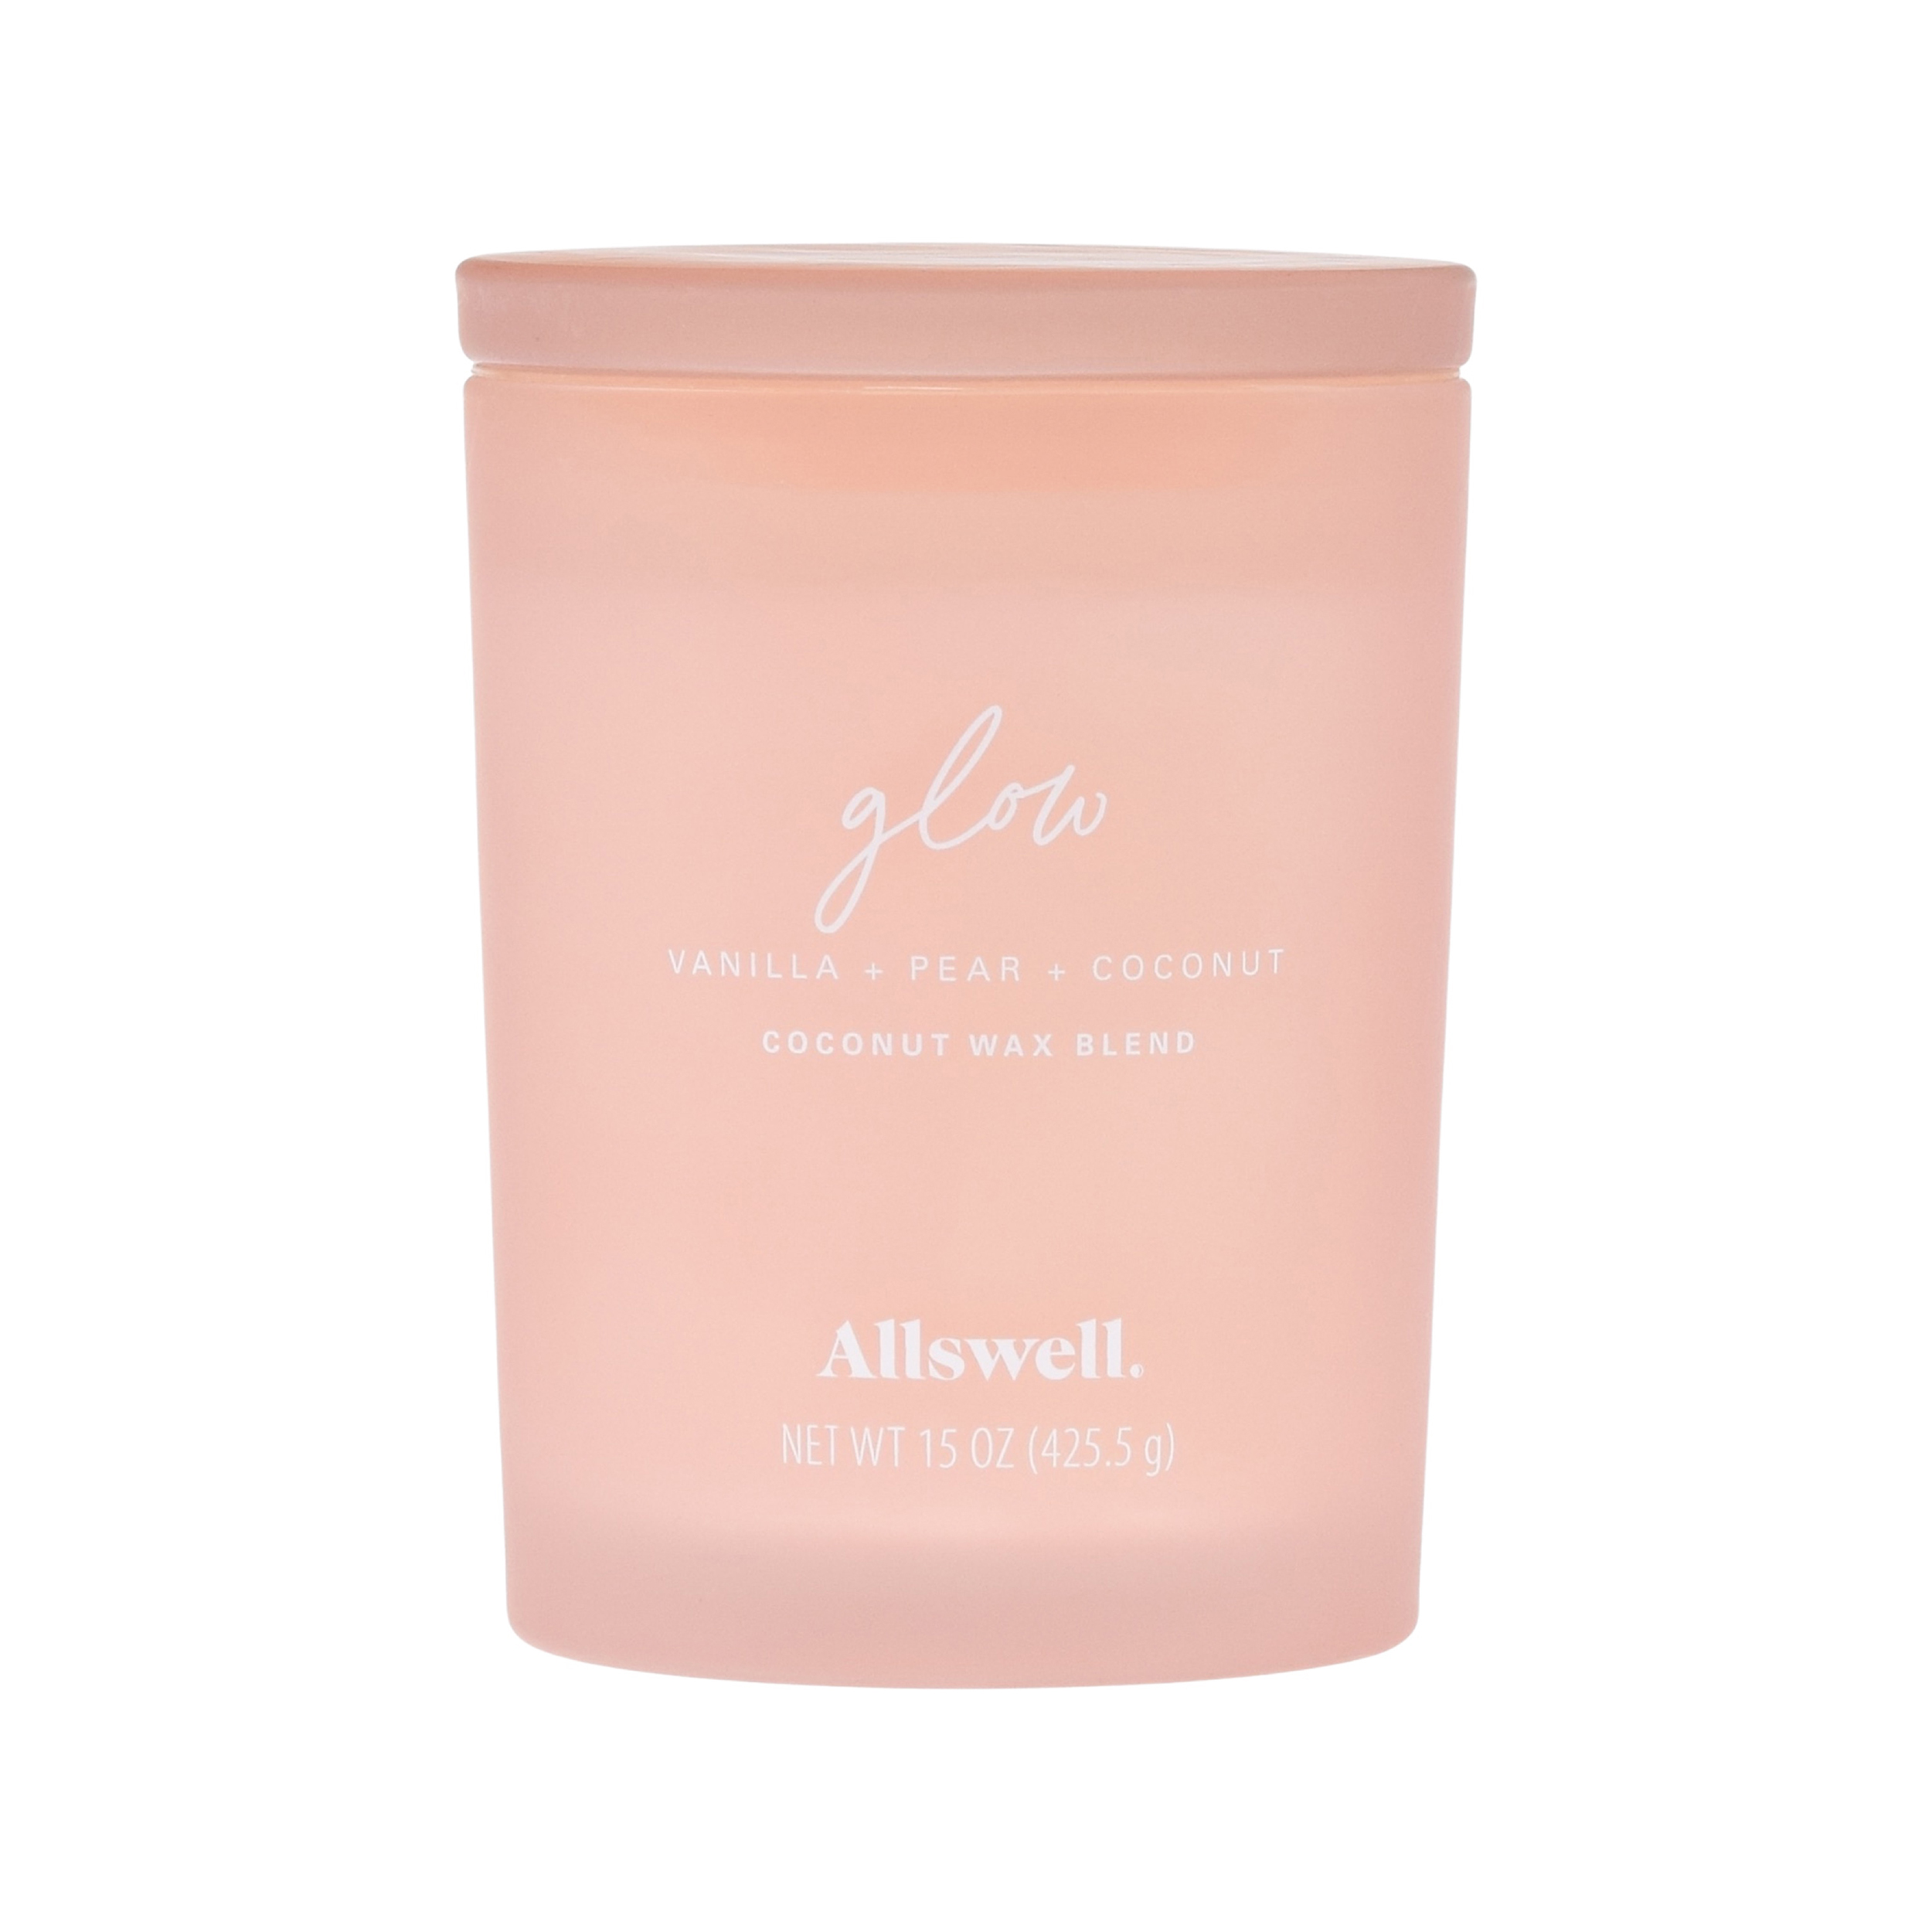 Allswell 15oz Scented 2-Wick Spa Candle - Glow (Vanilla + Pear + Coconut) - image 1 of 4